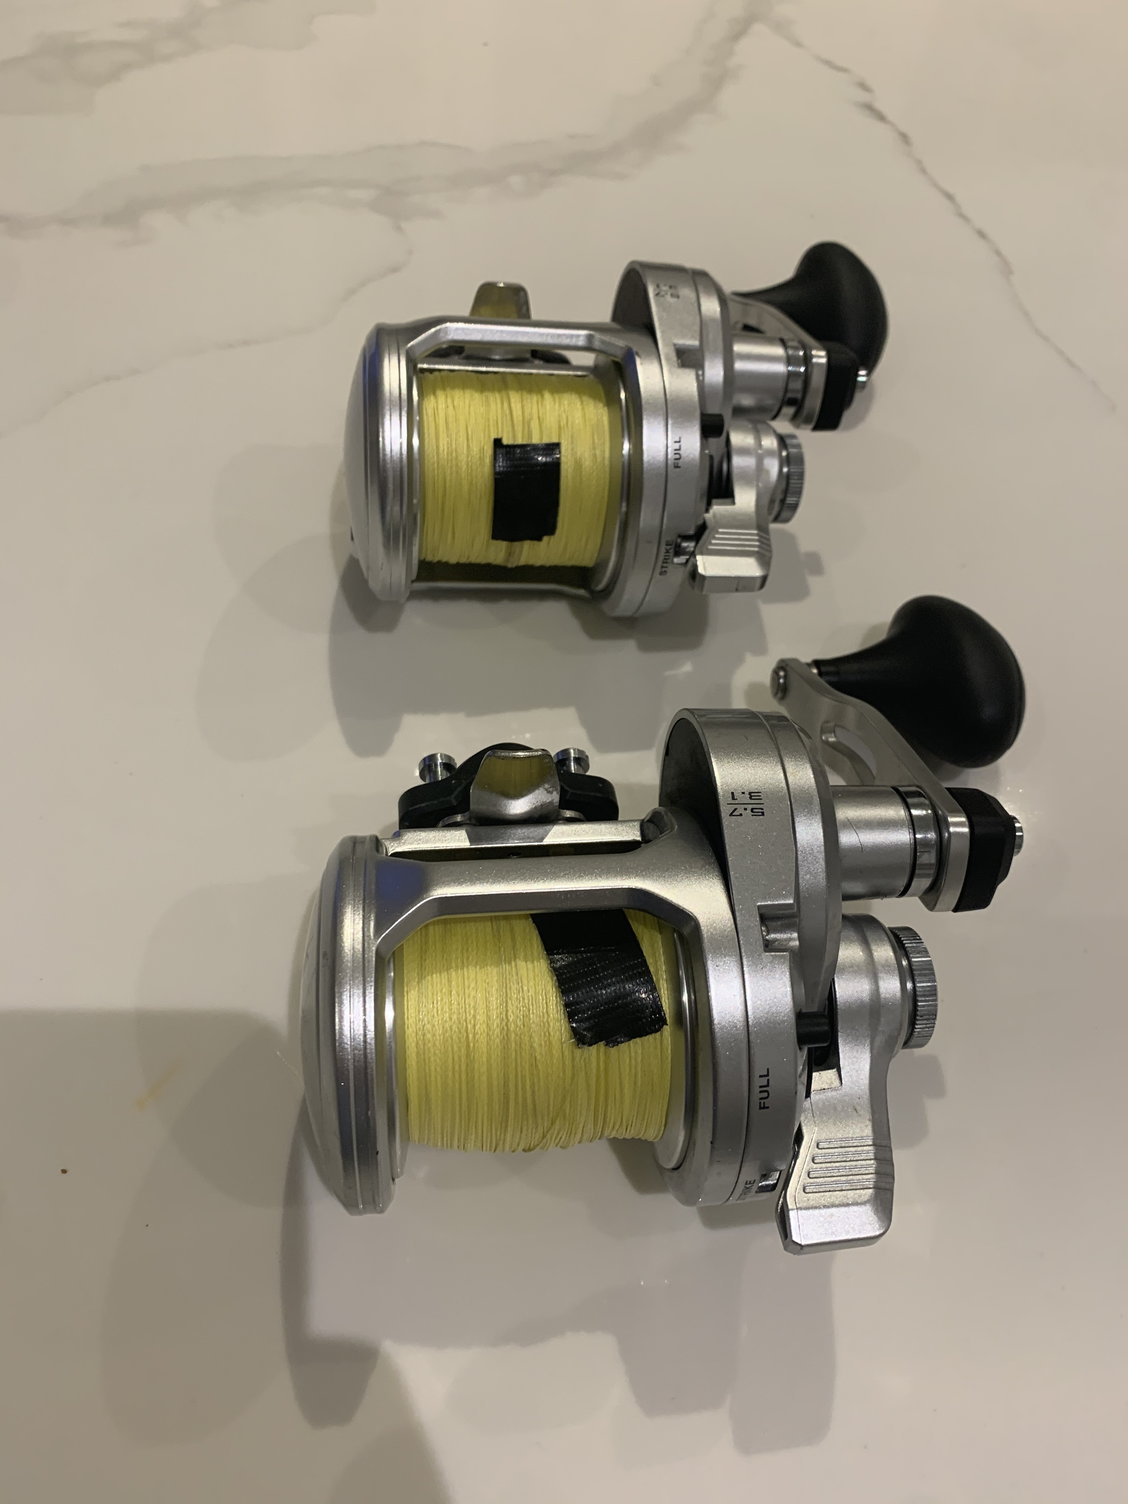 Shimano Speedmaster 16 2 speed x2 - The Hull Truth - Boating and